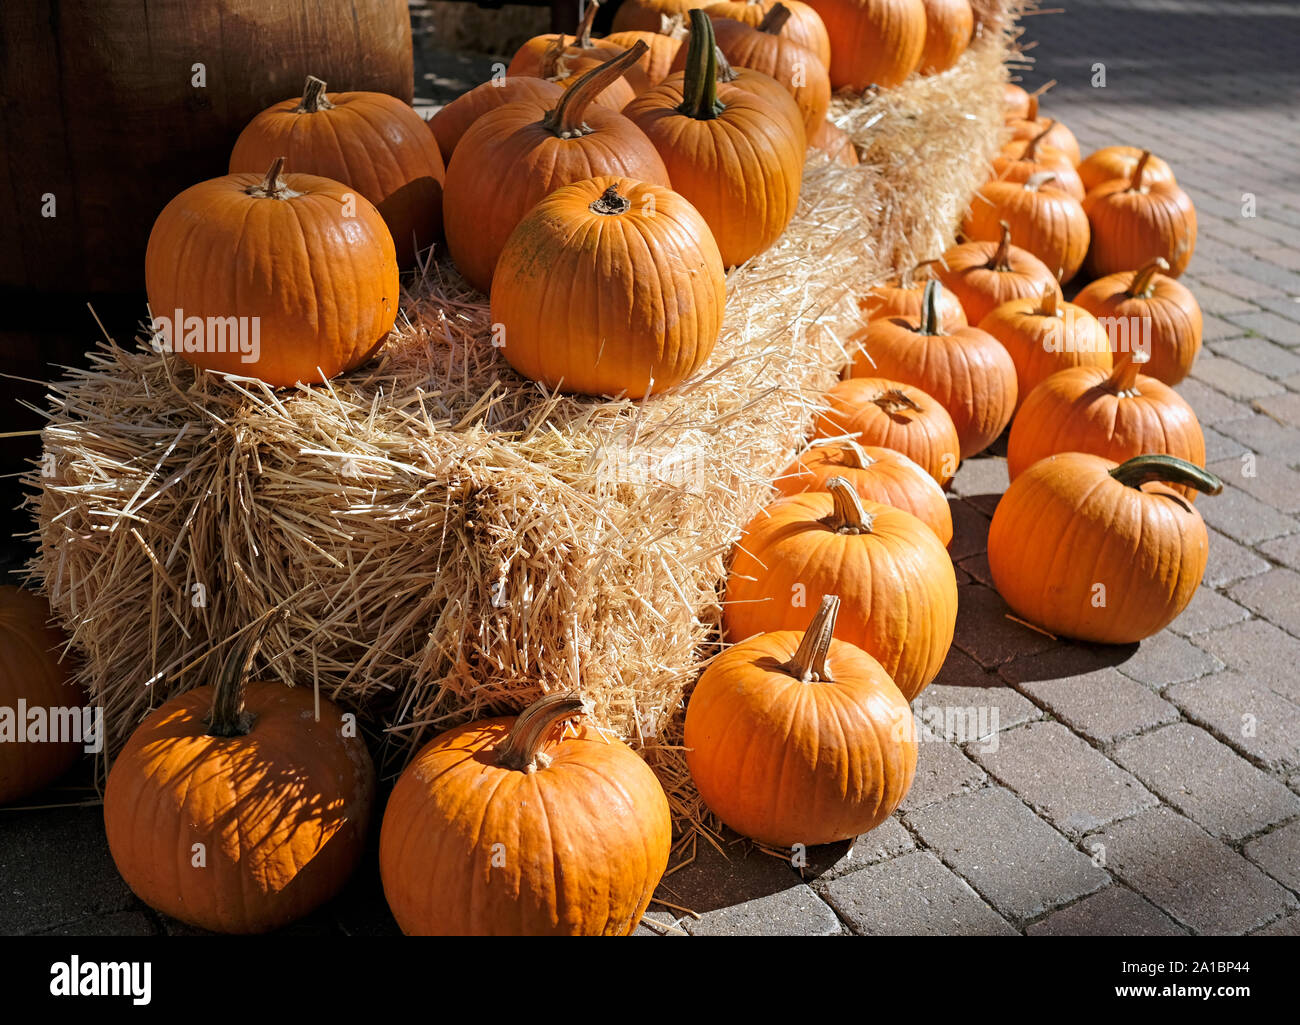 Thanksgiving and Halloween: Multiple pumpkins on and around stacks of hay Stock Photo